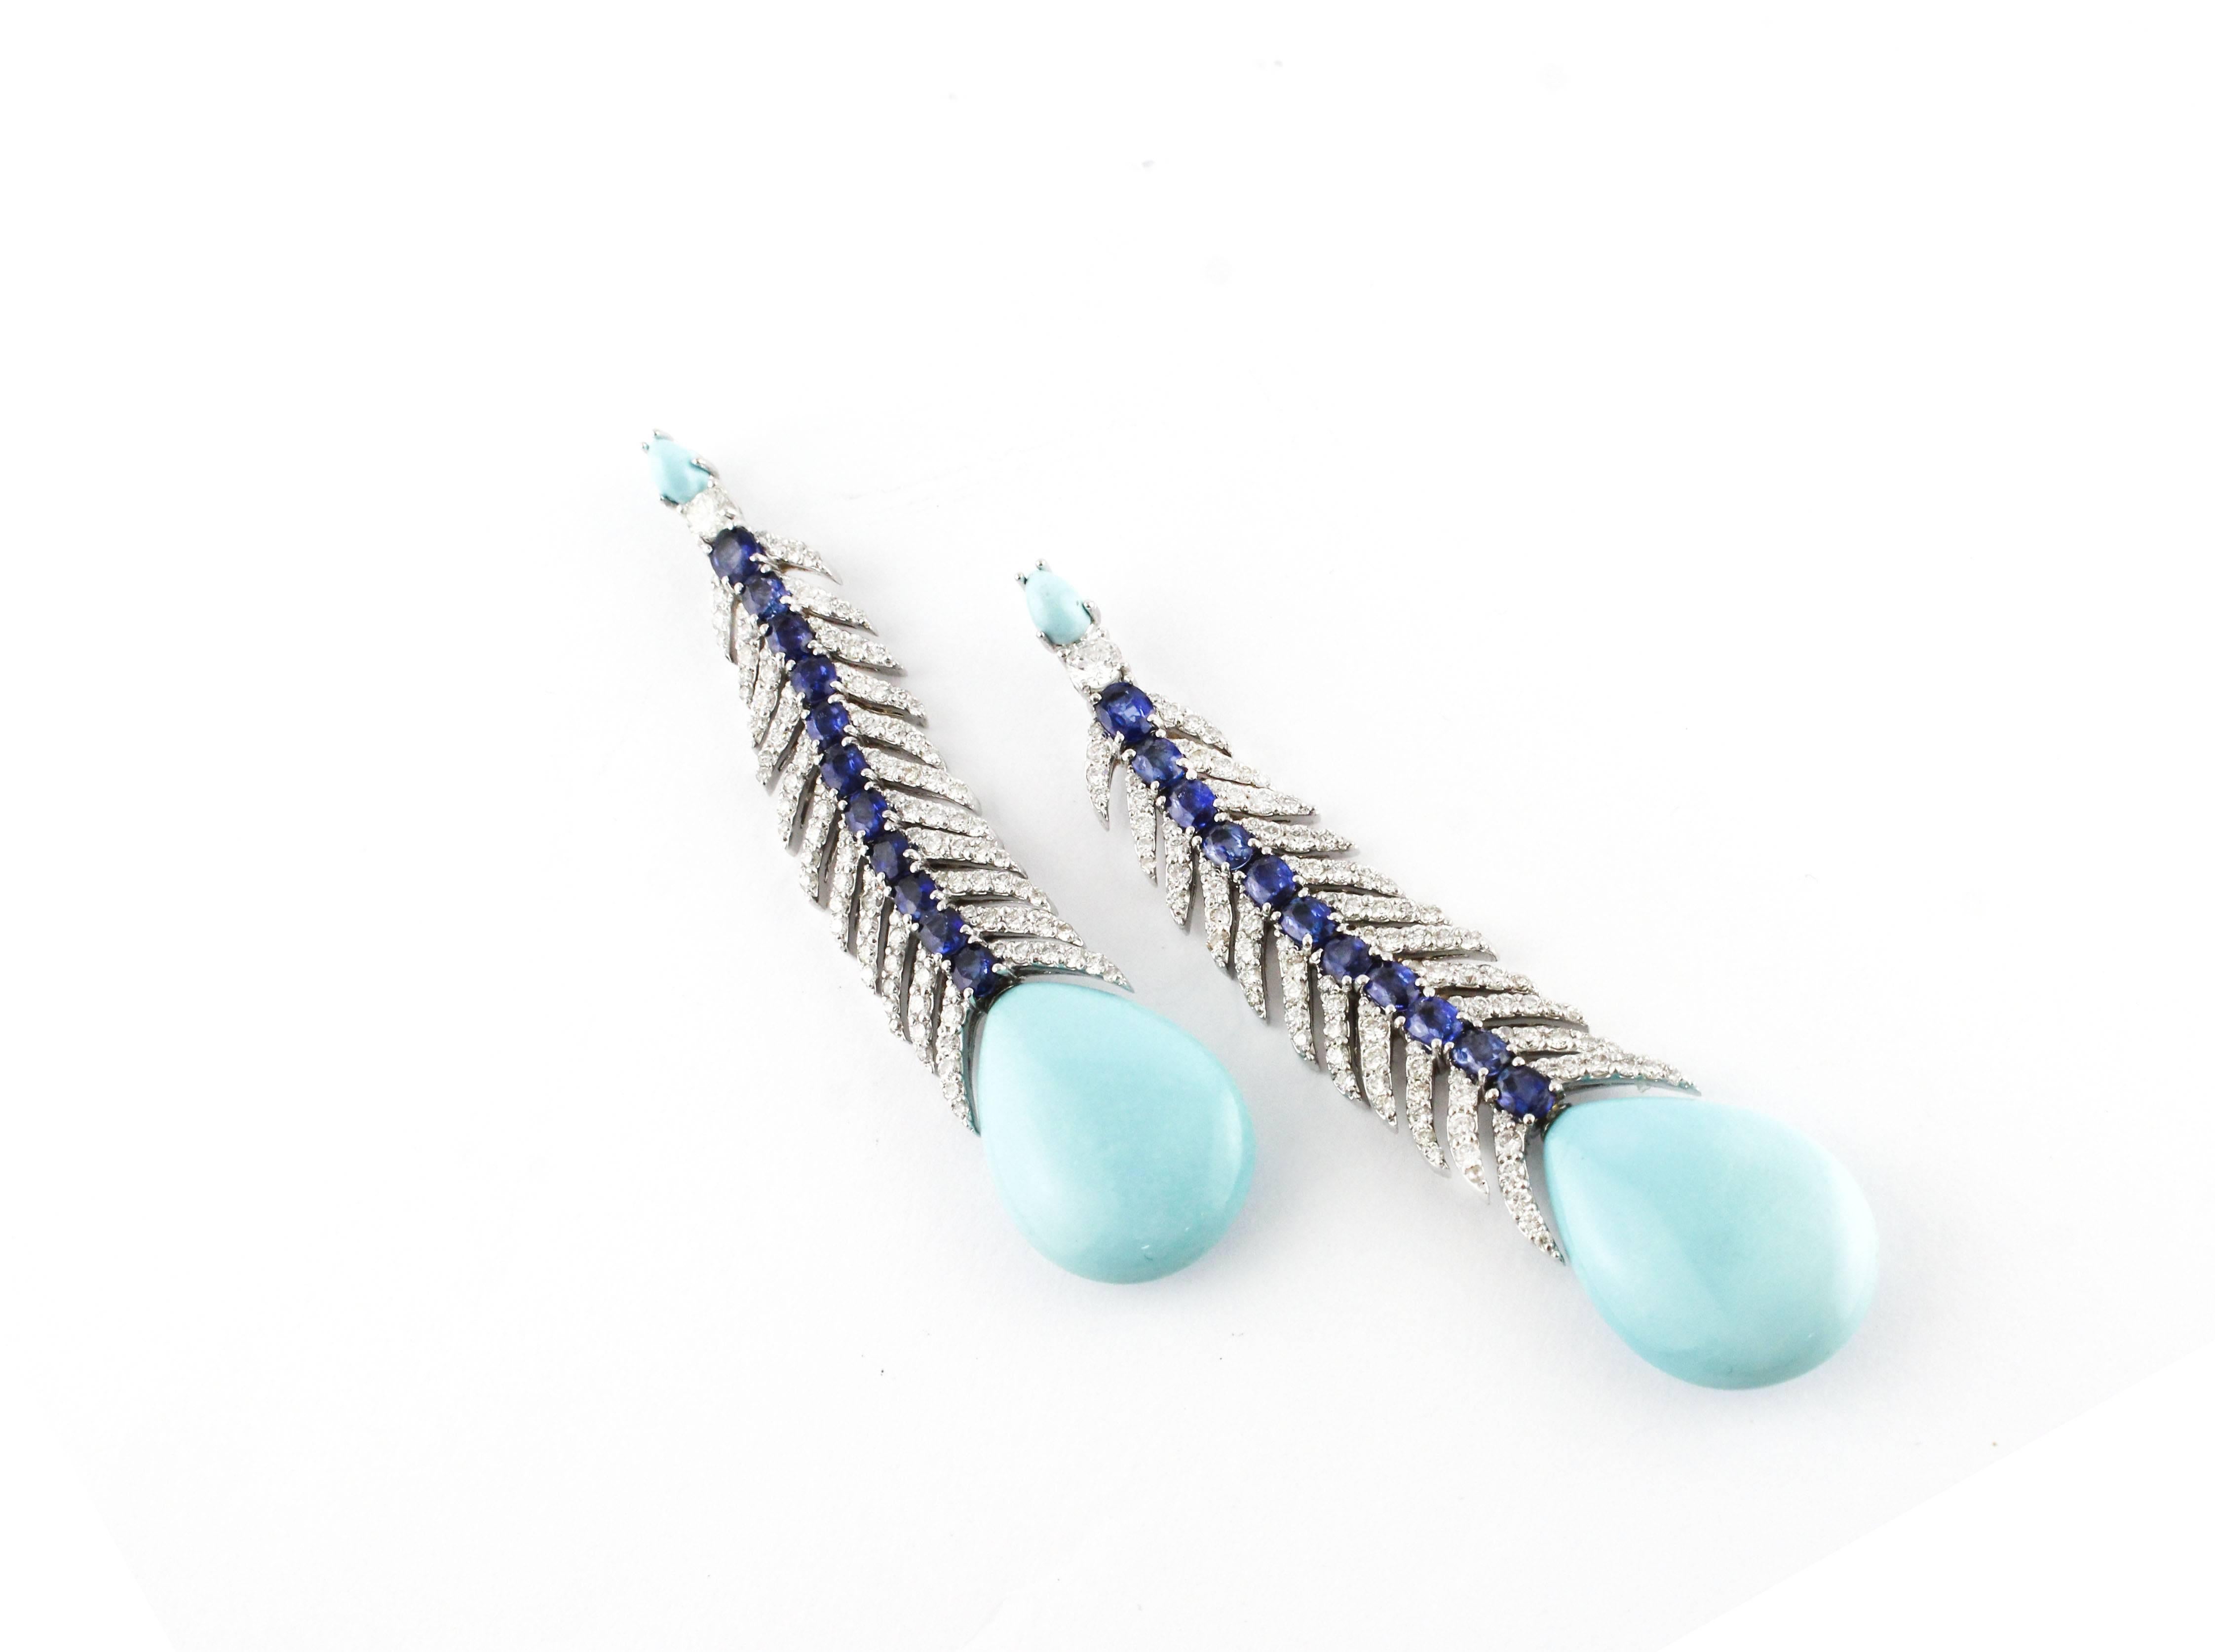 Women's Dangle Earrings with Diamonds, Sapphires and Turquoise